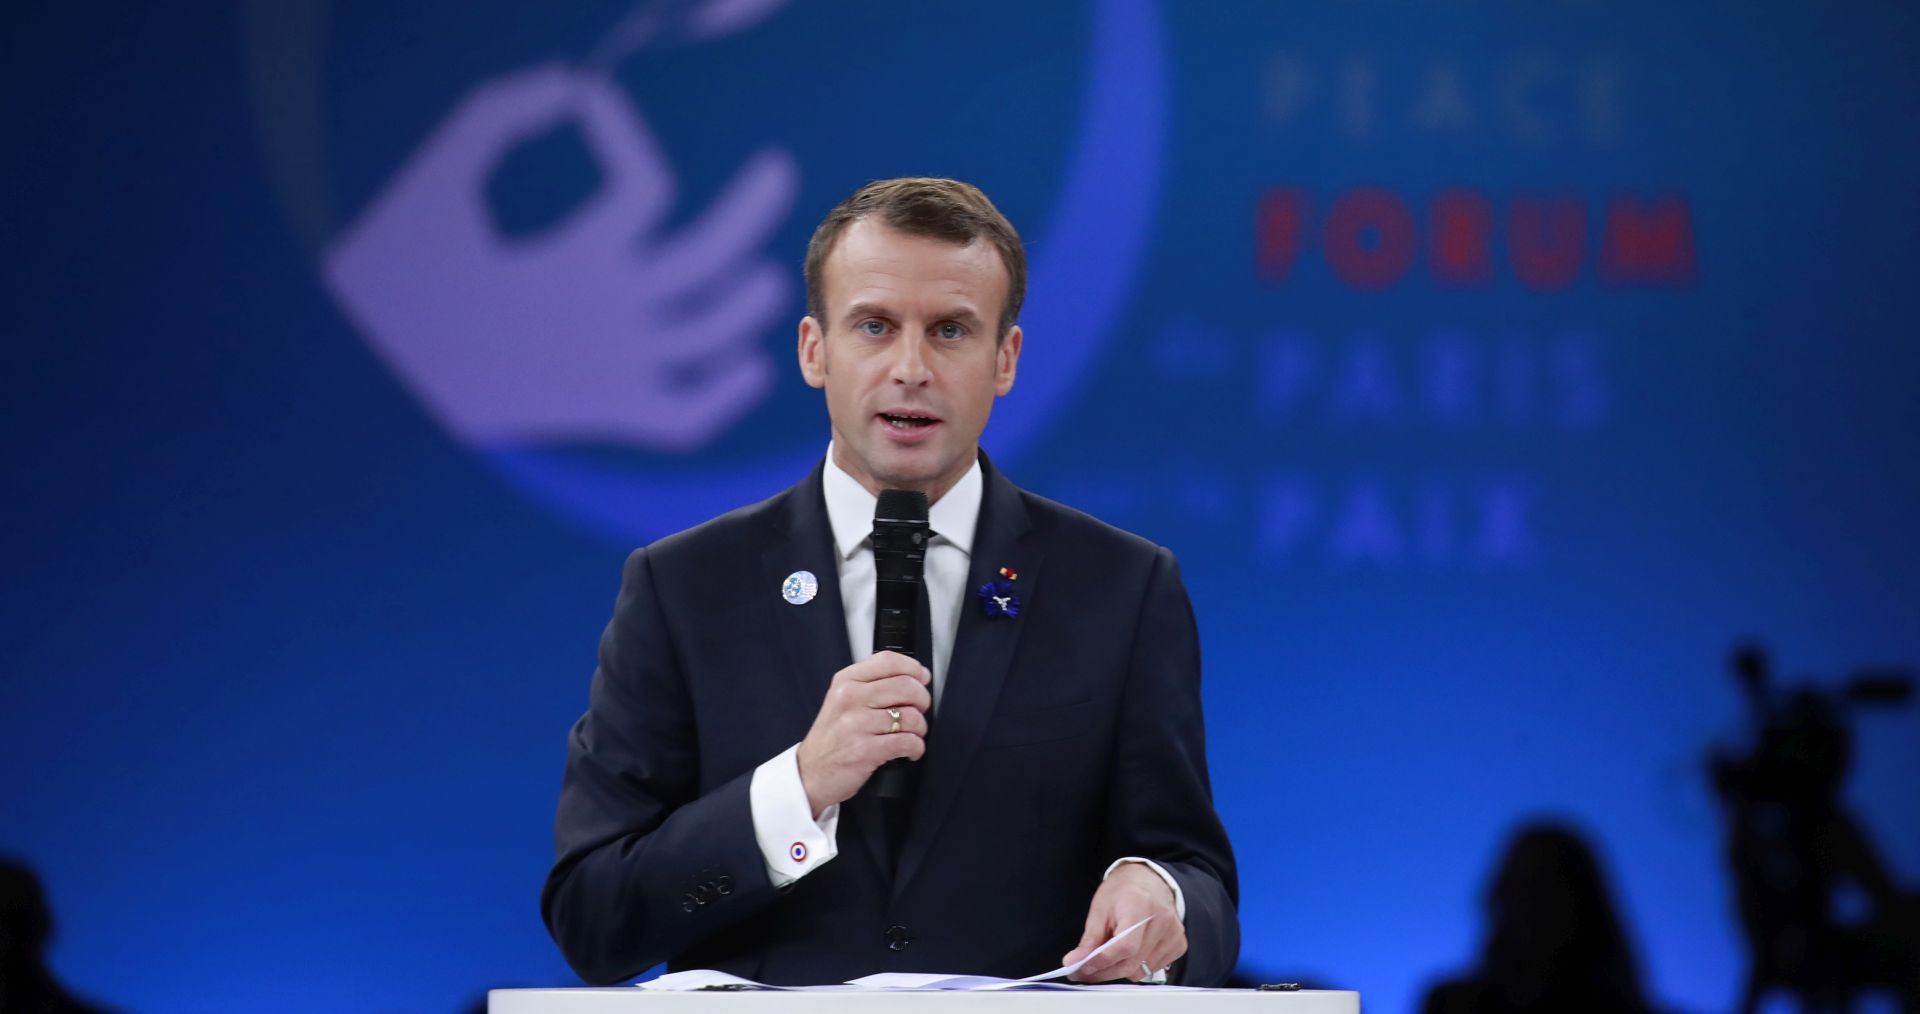 epa07158818 French President Emmanuel Macron delivers a speech at the opening session of the Paris Peace Forum as part of the international commemoration ceremony for the Centenary of the WWI Armistice of 11 November 1918, in Paris, France, 11 November 2018. World leaders have gathered in France to mark the 100th anniversary of the First World War Armistice with services taking place across the world to commemorate the occasion.  EPA/GONZALO FUENTES / POOL MAXPPP OUT